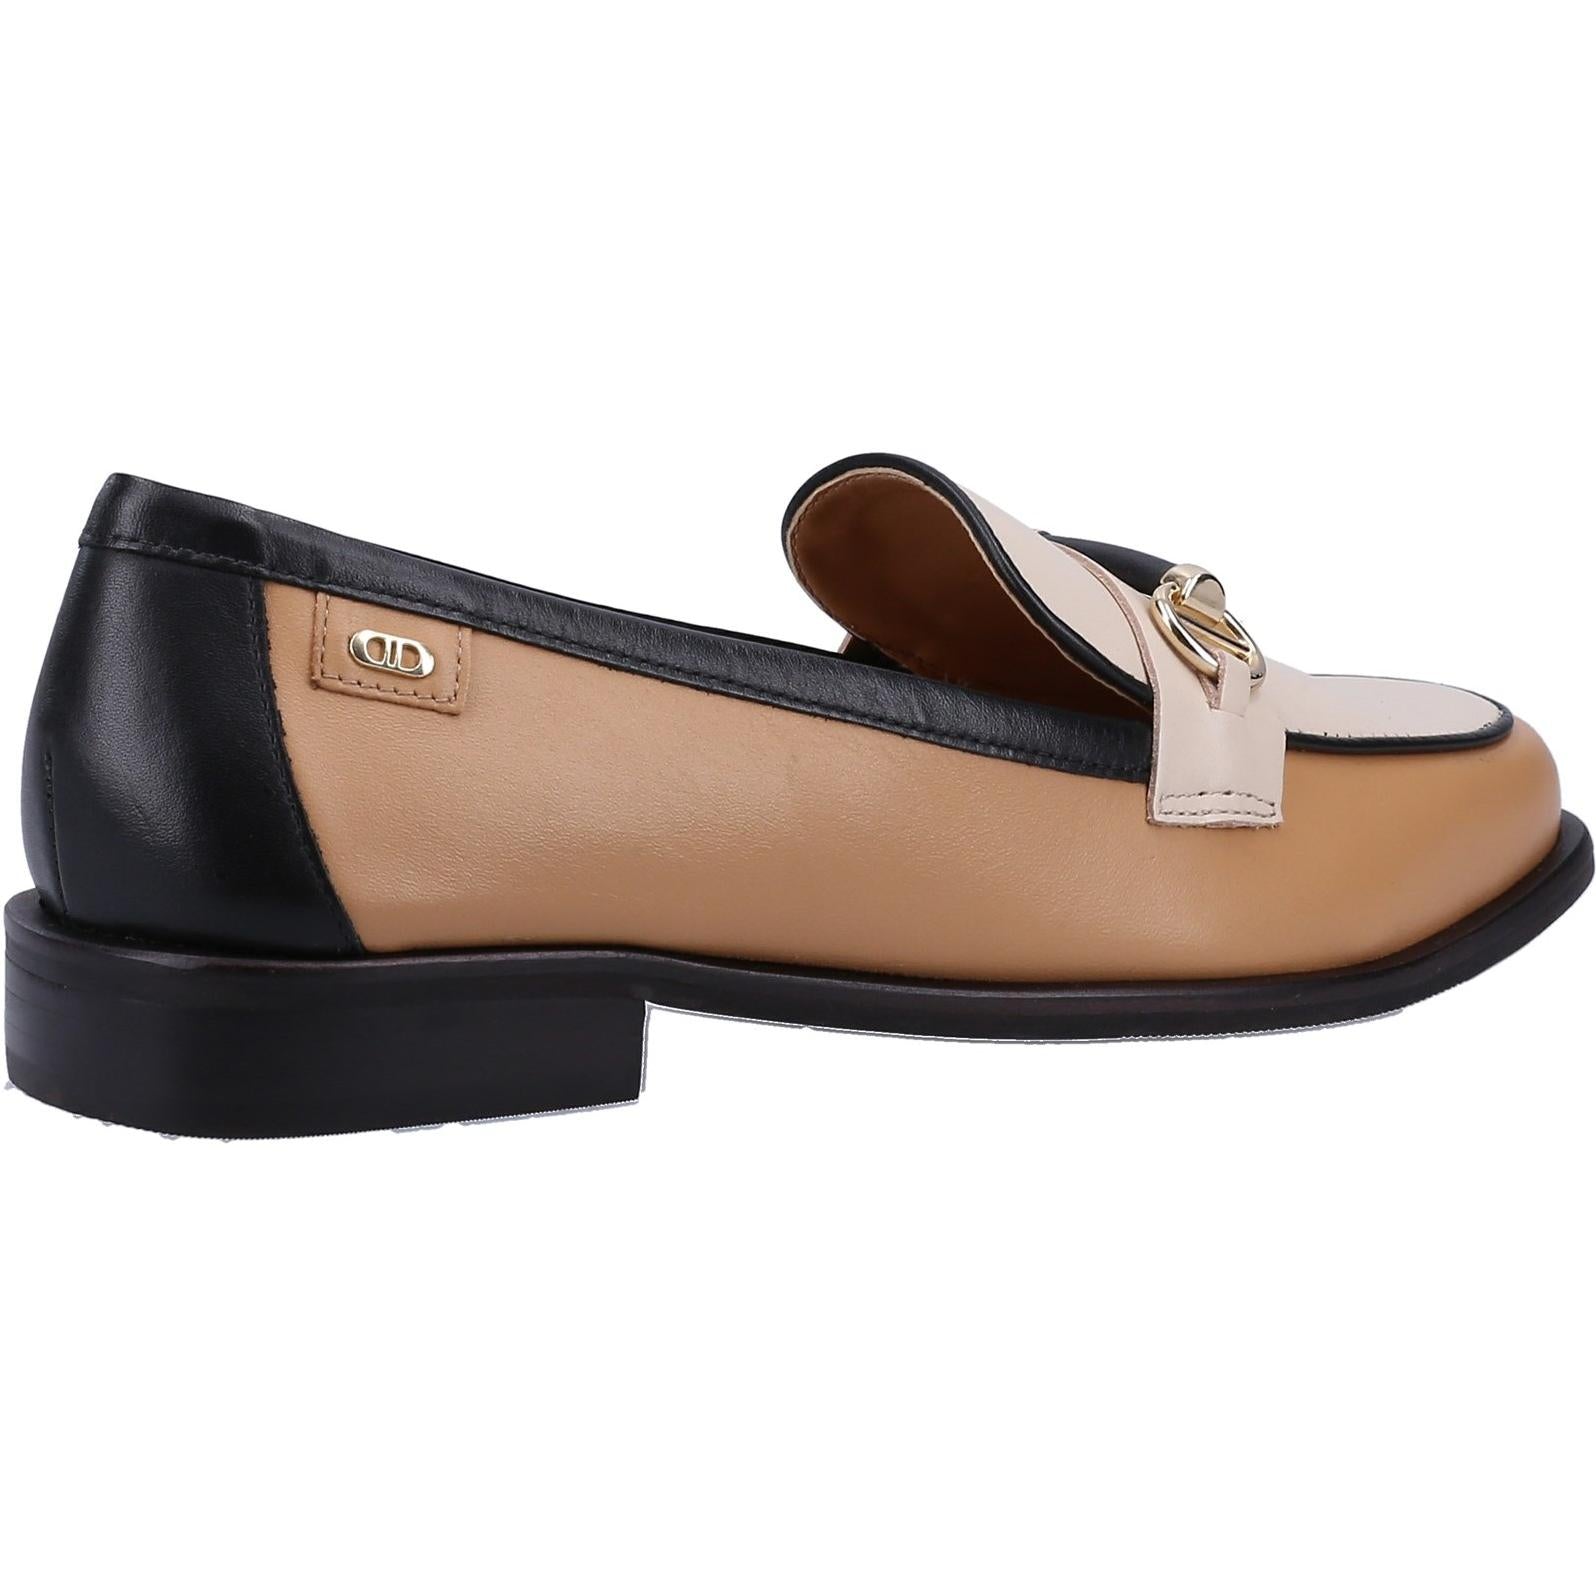 Dune London Glossi Loafers Flats